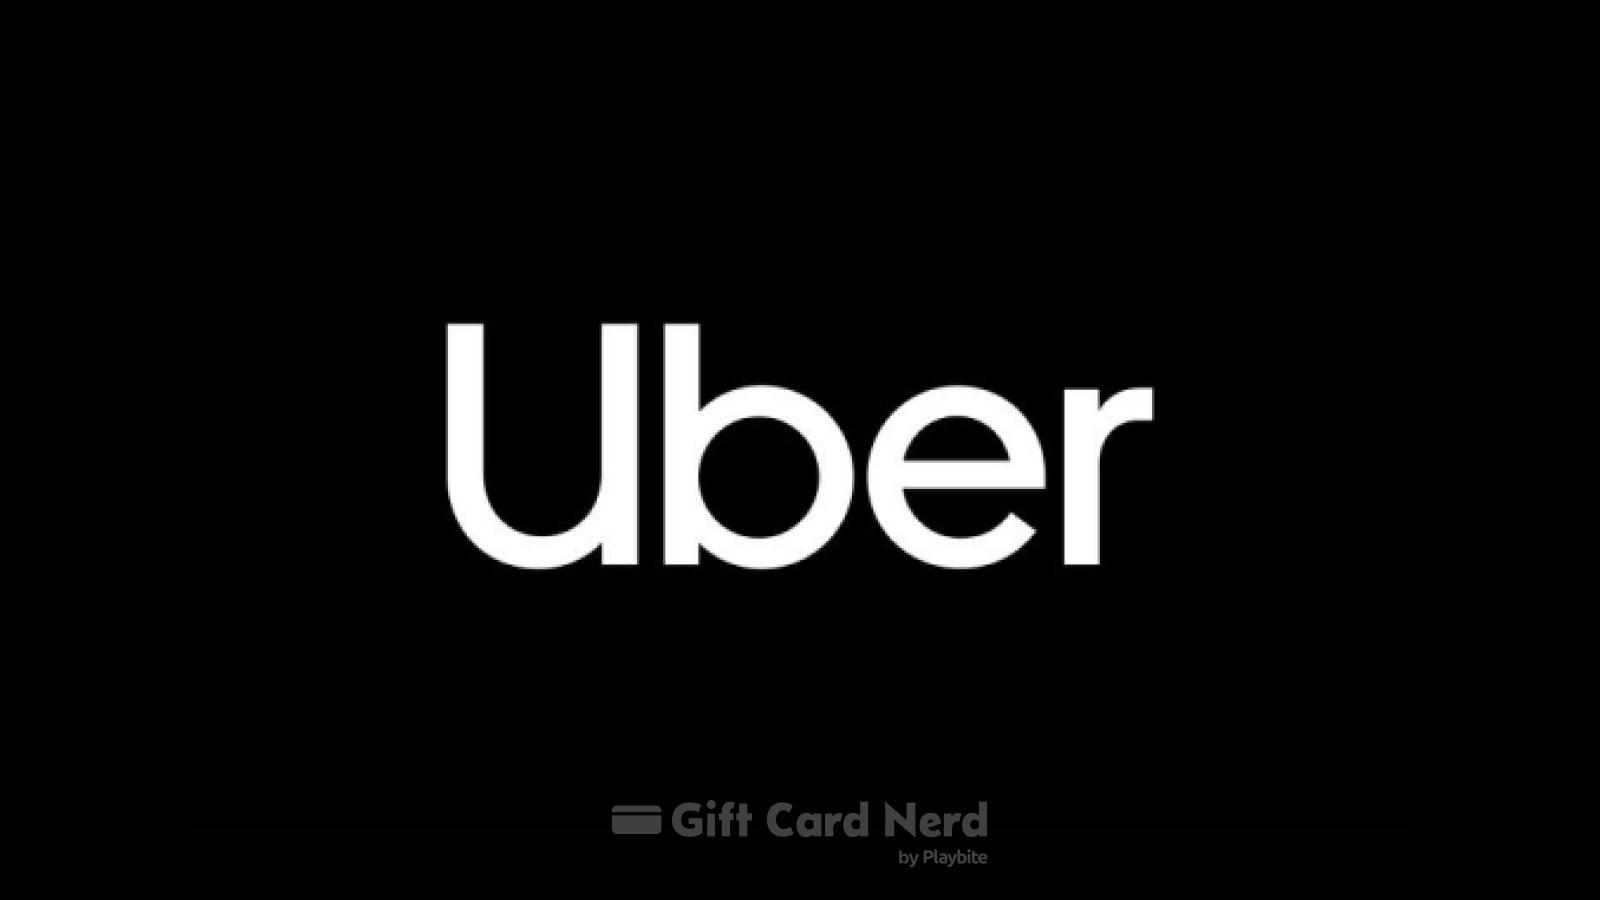 Can I Use an Uber Gift Card on the Google Play Store?